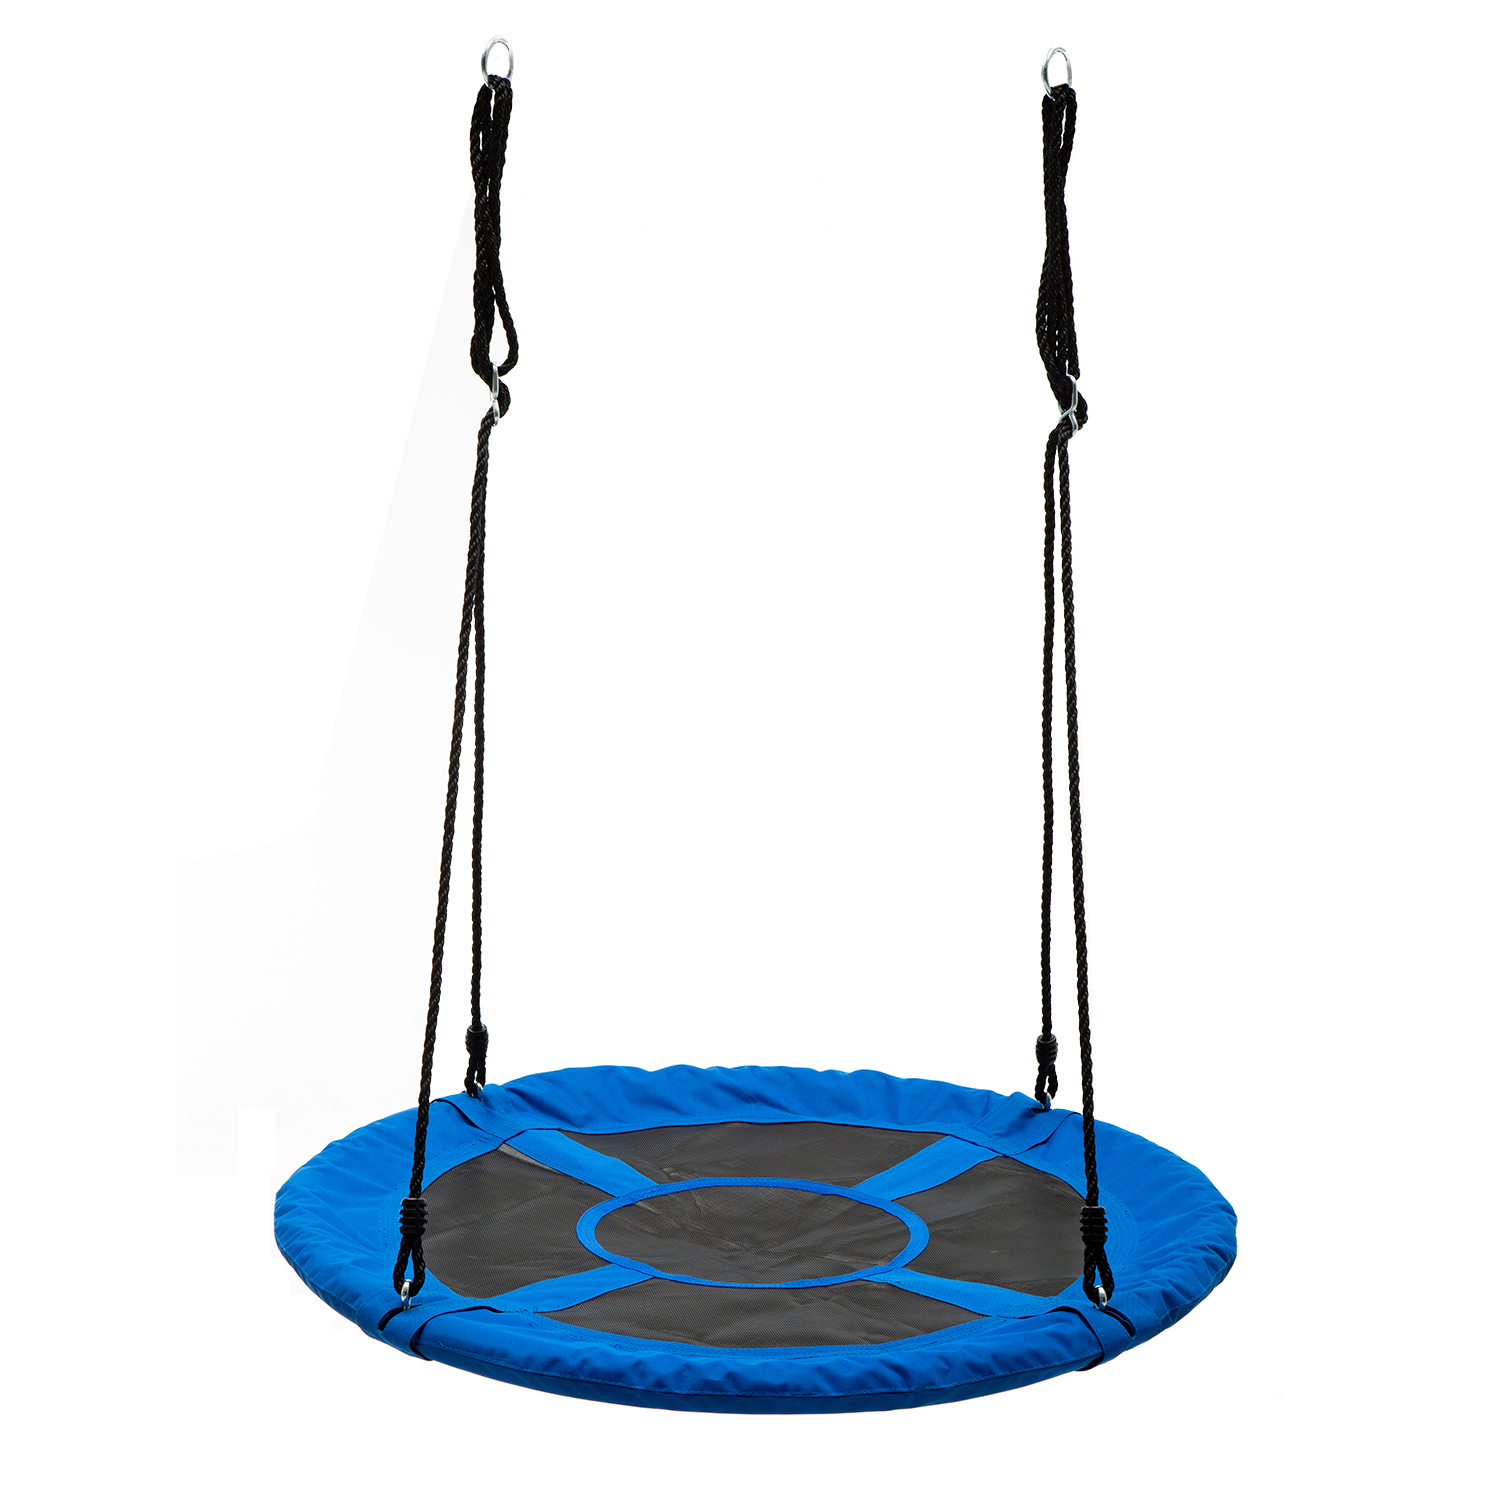 Walsport 40" Round Hanging Chair Swing Multi-seater Rainbow Platform Mat Indoor & Outdoor kids Flying Sky Swing Lounge Chair Park, Blue - image 3 of 14